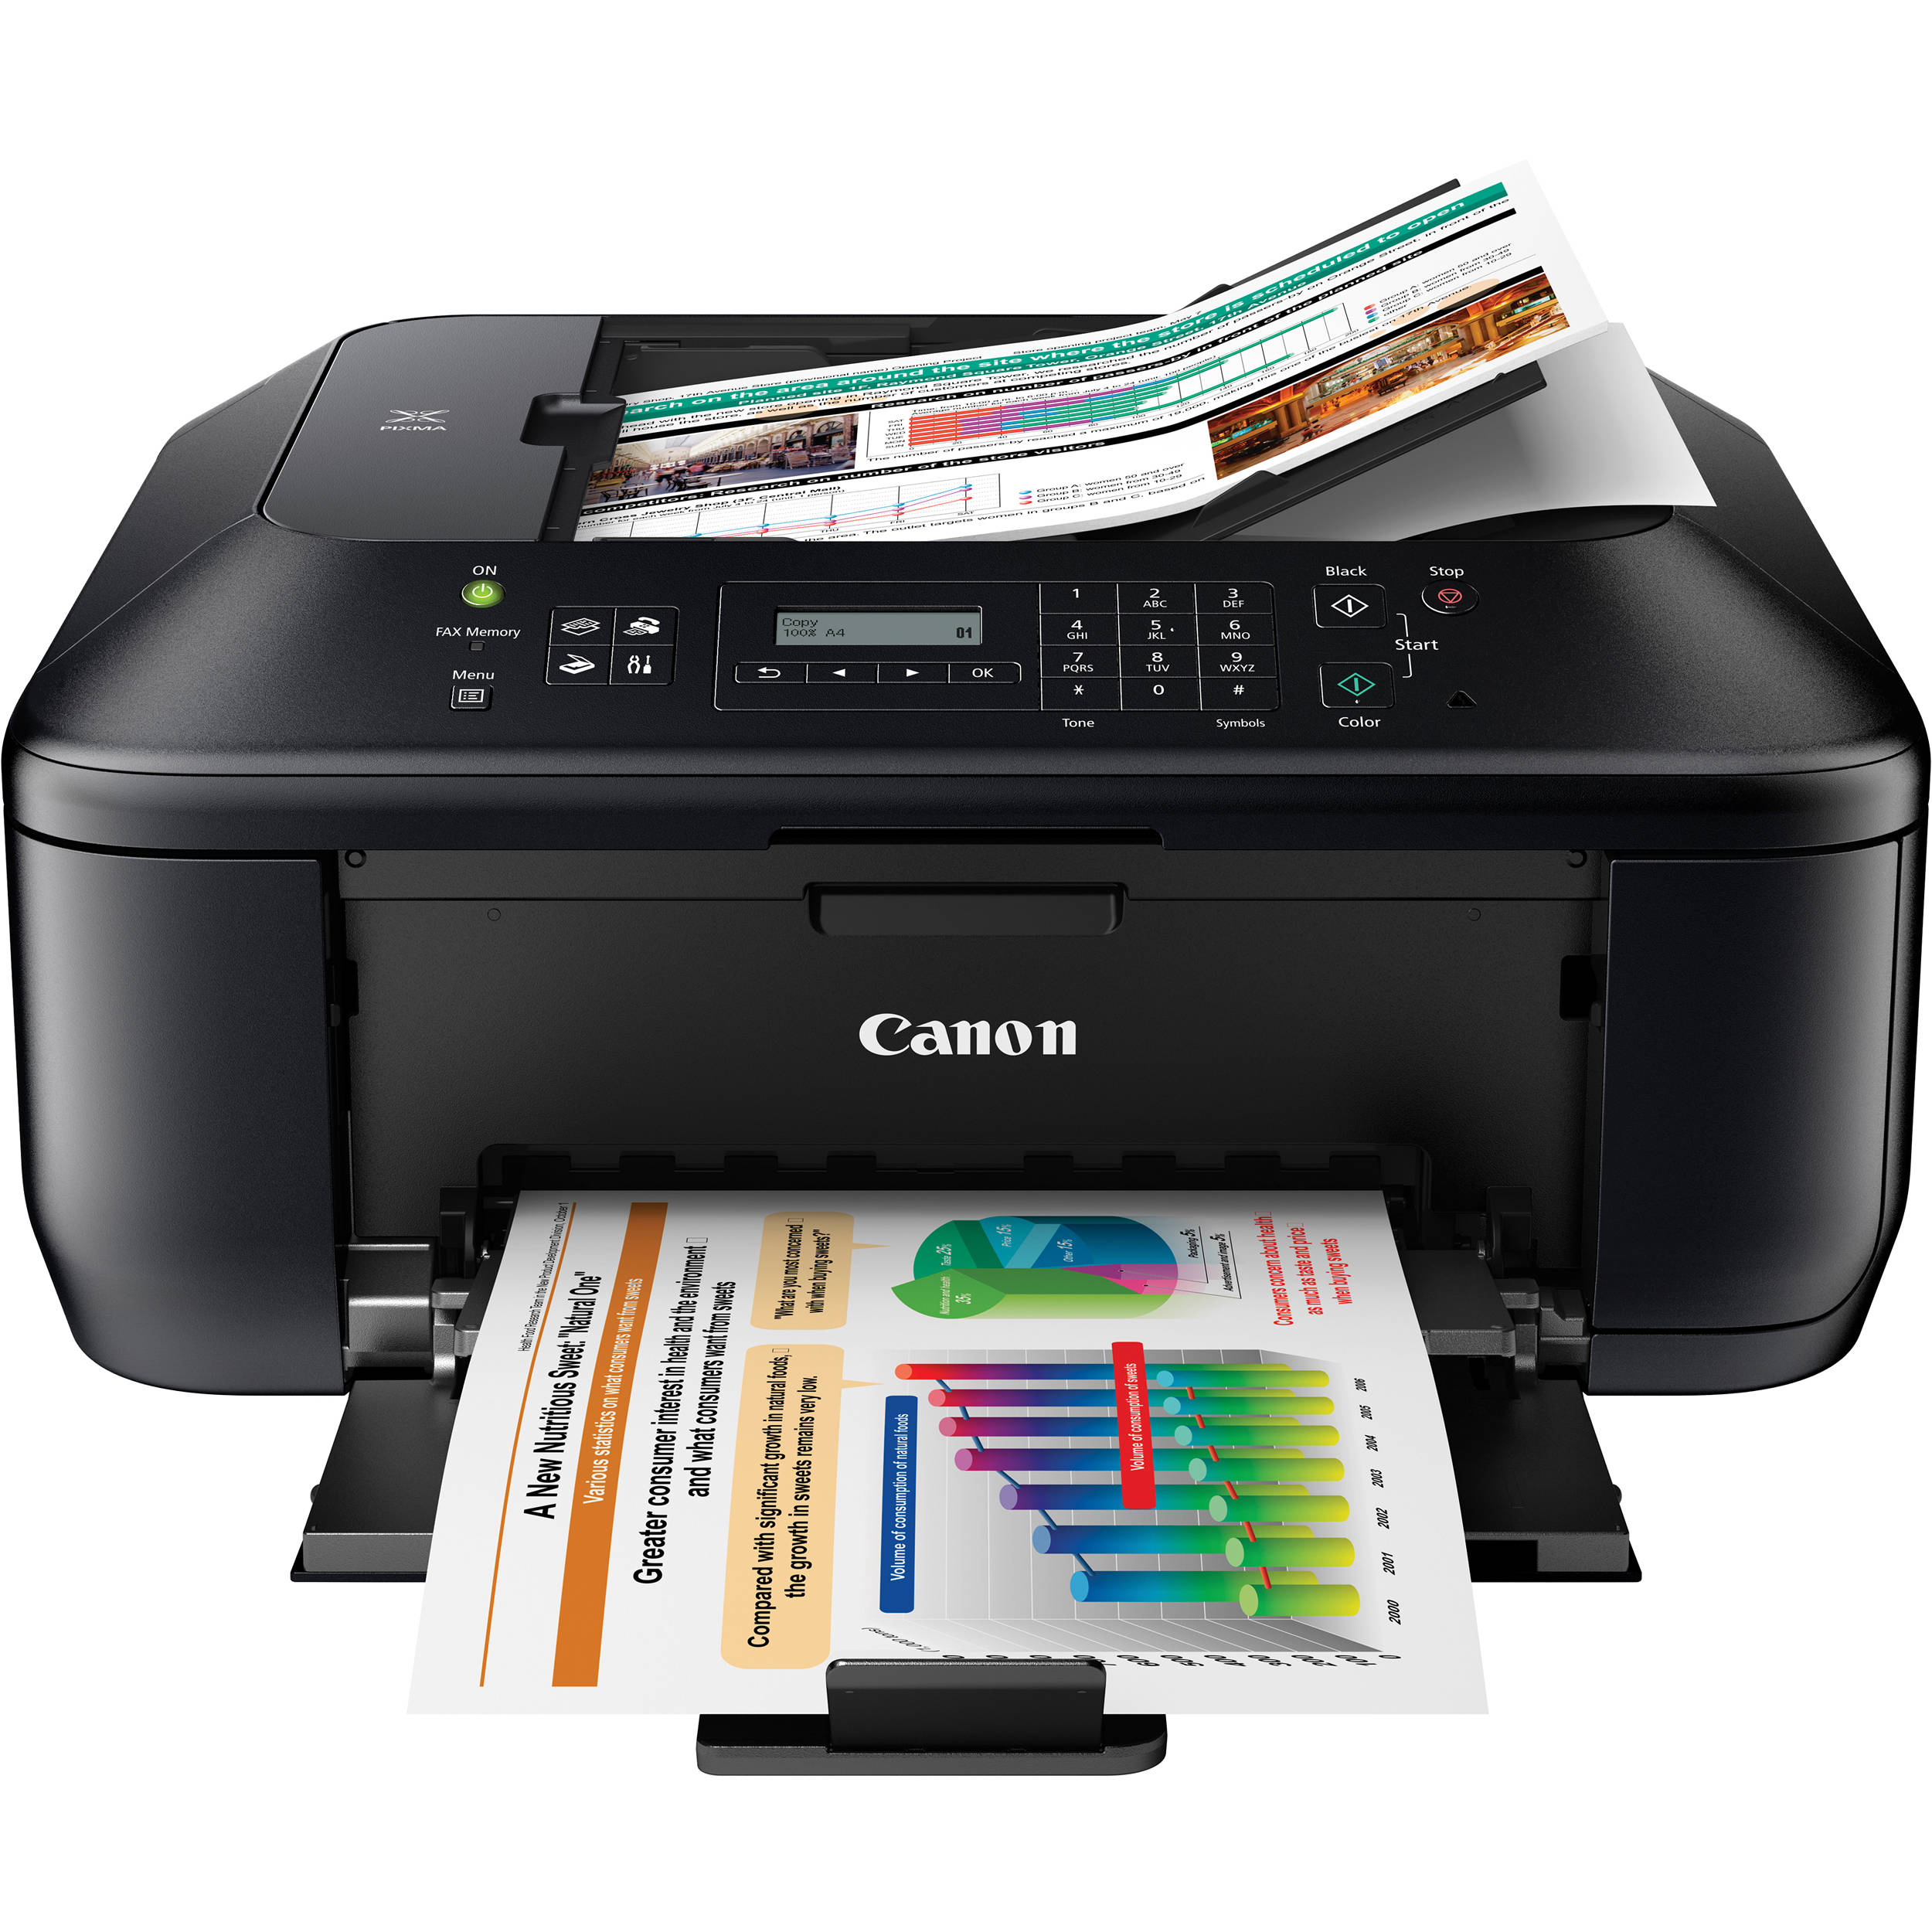 How to Install Canon PIXMA MX372 Printer/Scanner in Ubuntu GNU/Linux - Featured